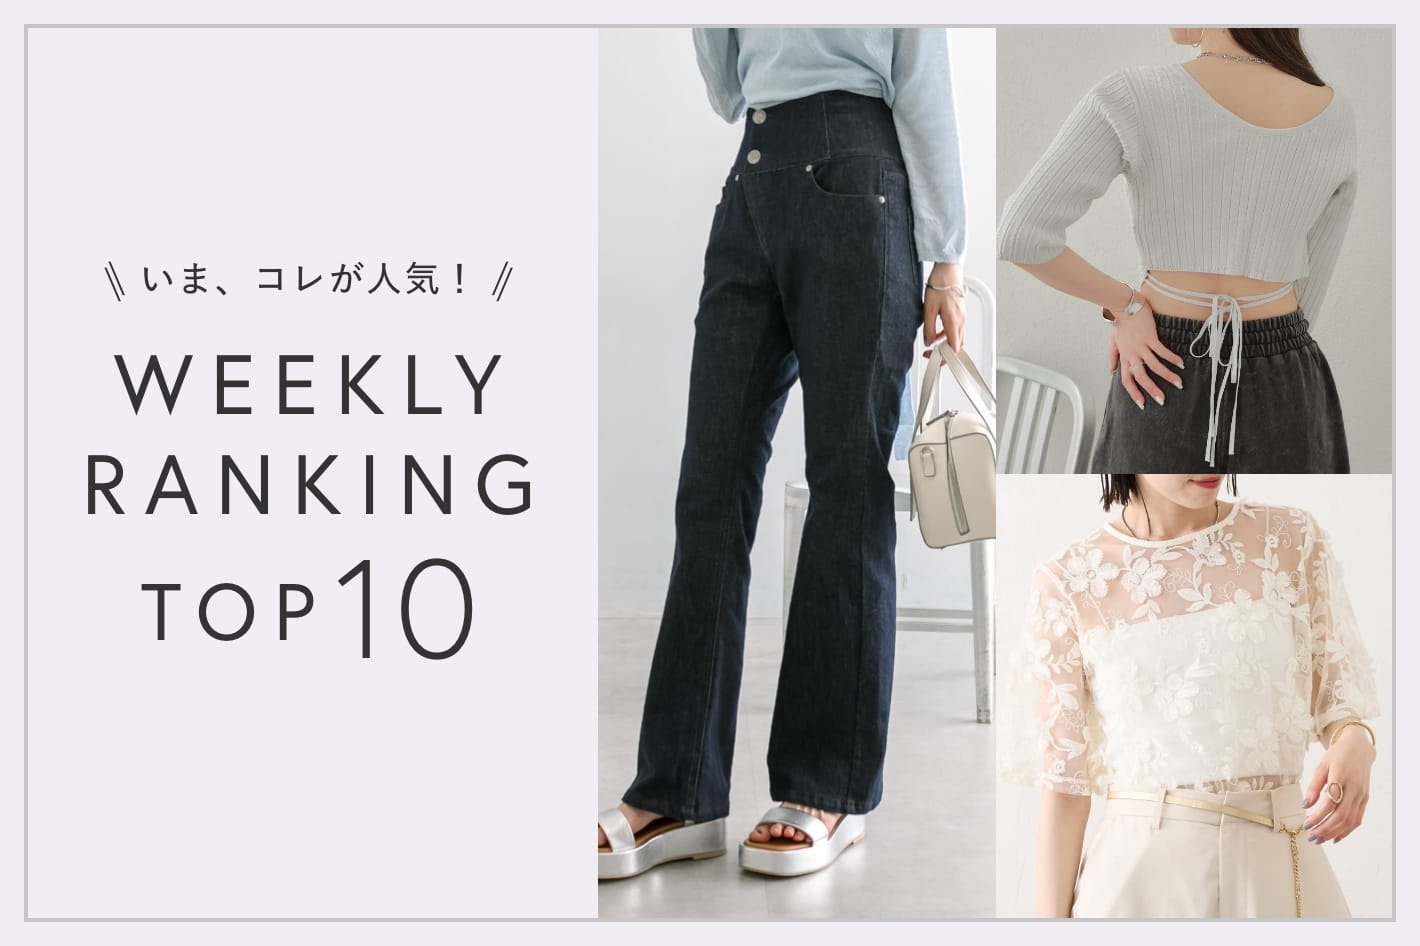 OUTLET いま、これが人気！WEEKLY RANKING TOP10！【7/16更新】